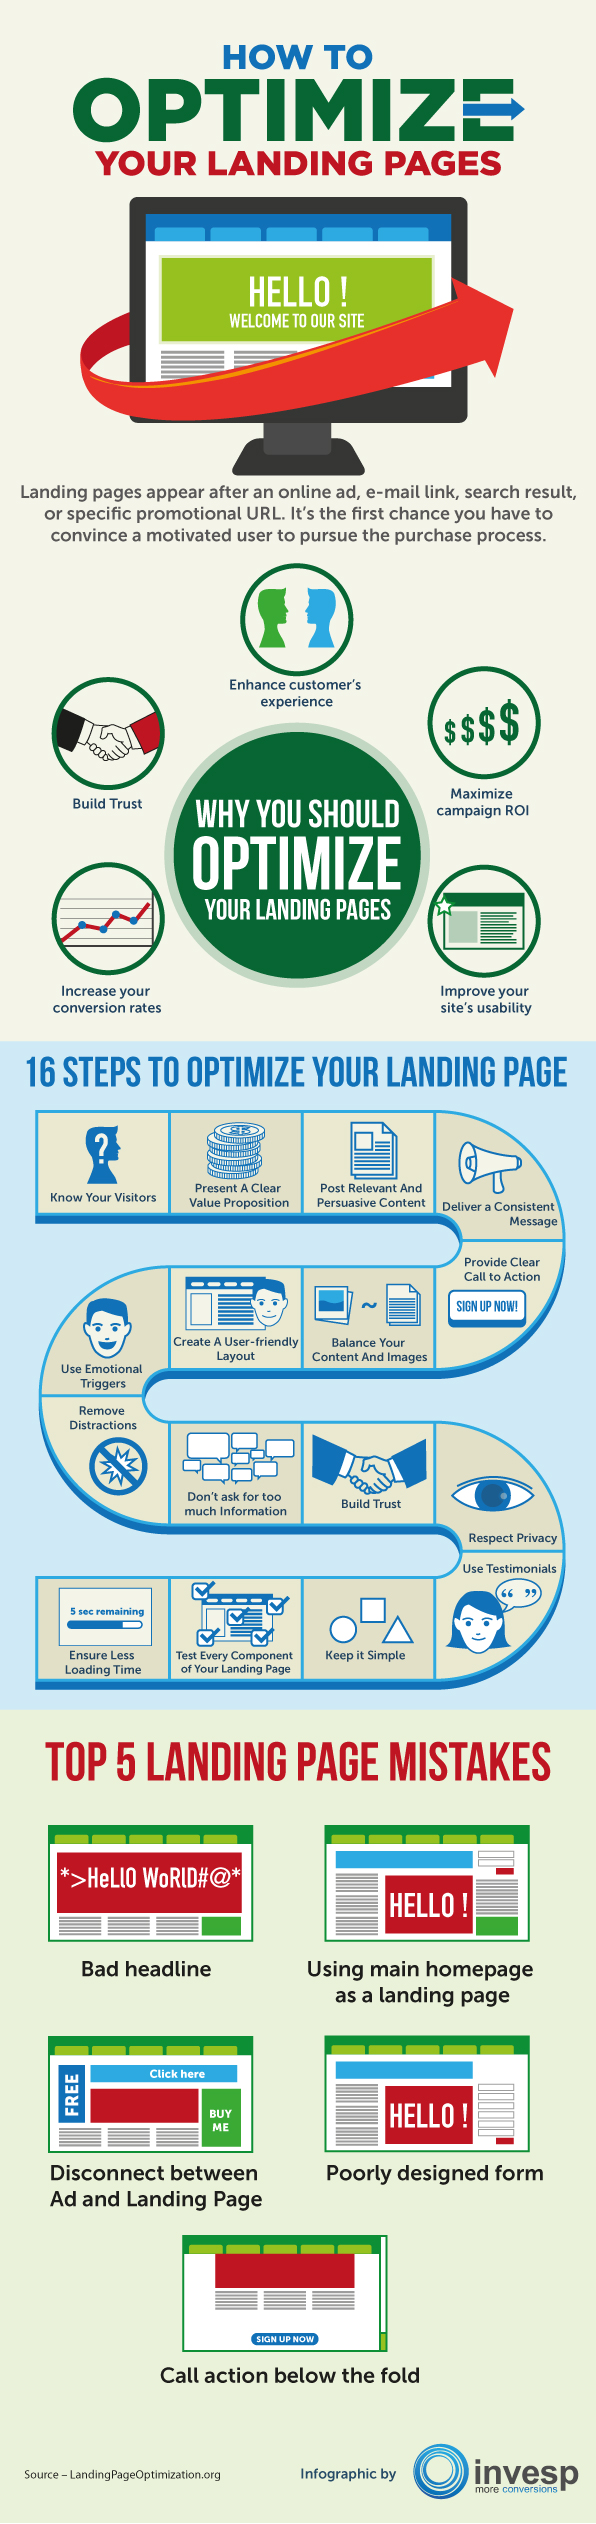 How to Optimize Your Landing Page